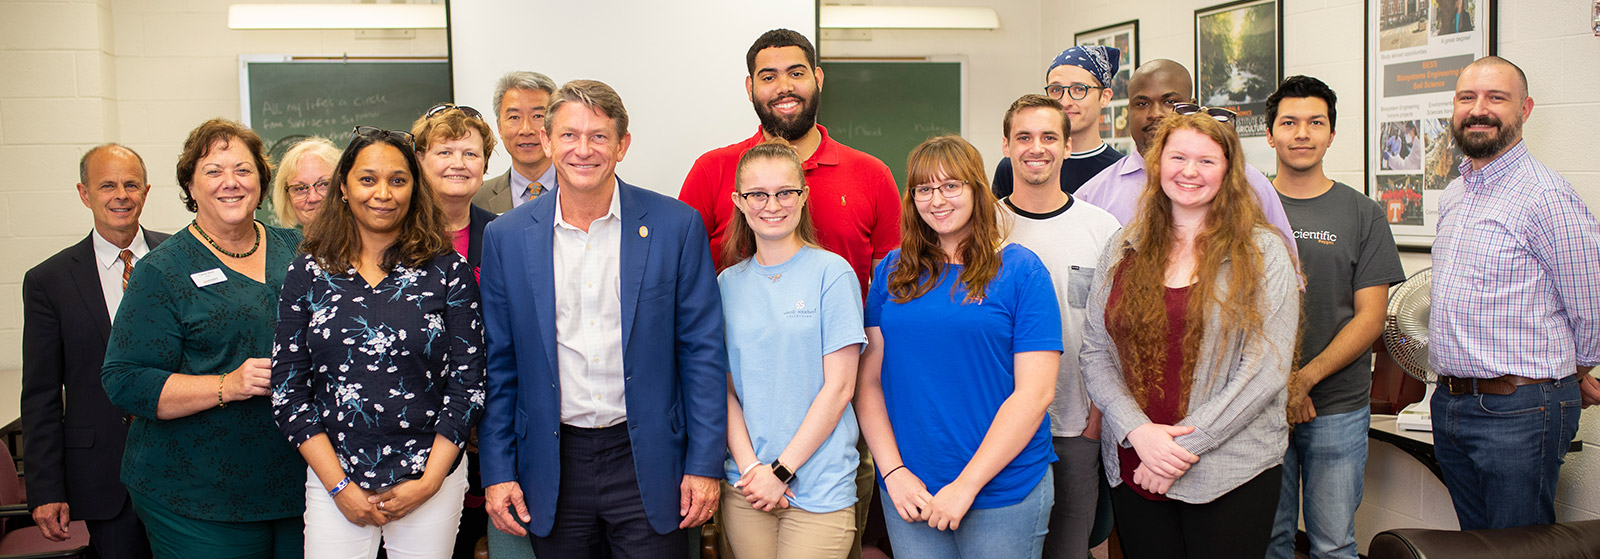 UT interim president Randy Boyd meets with VP Tim Cross and the first class of UT REACH students on the campus of UTIA